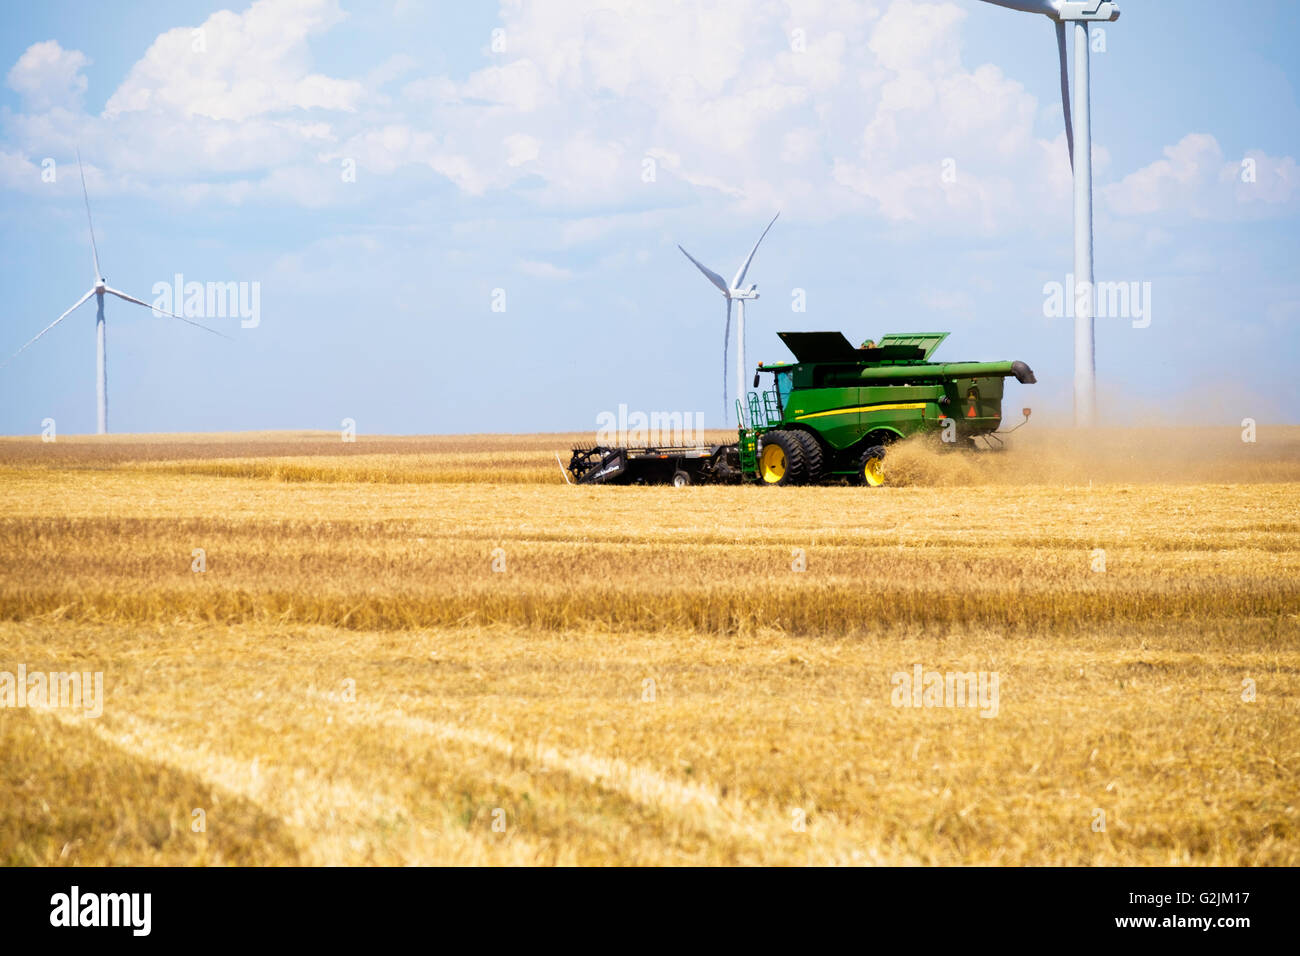 A John Deere combine harvests wheat in Oklahoma, USA.Wind farm in background. Stock Photo